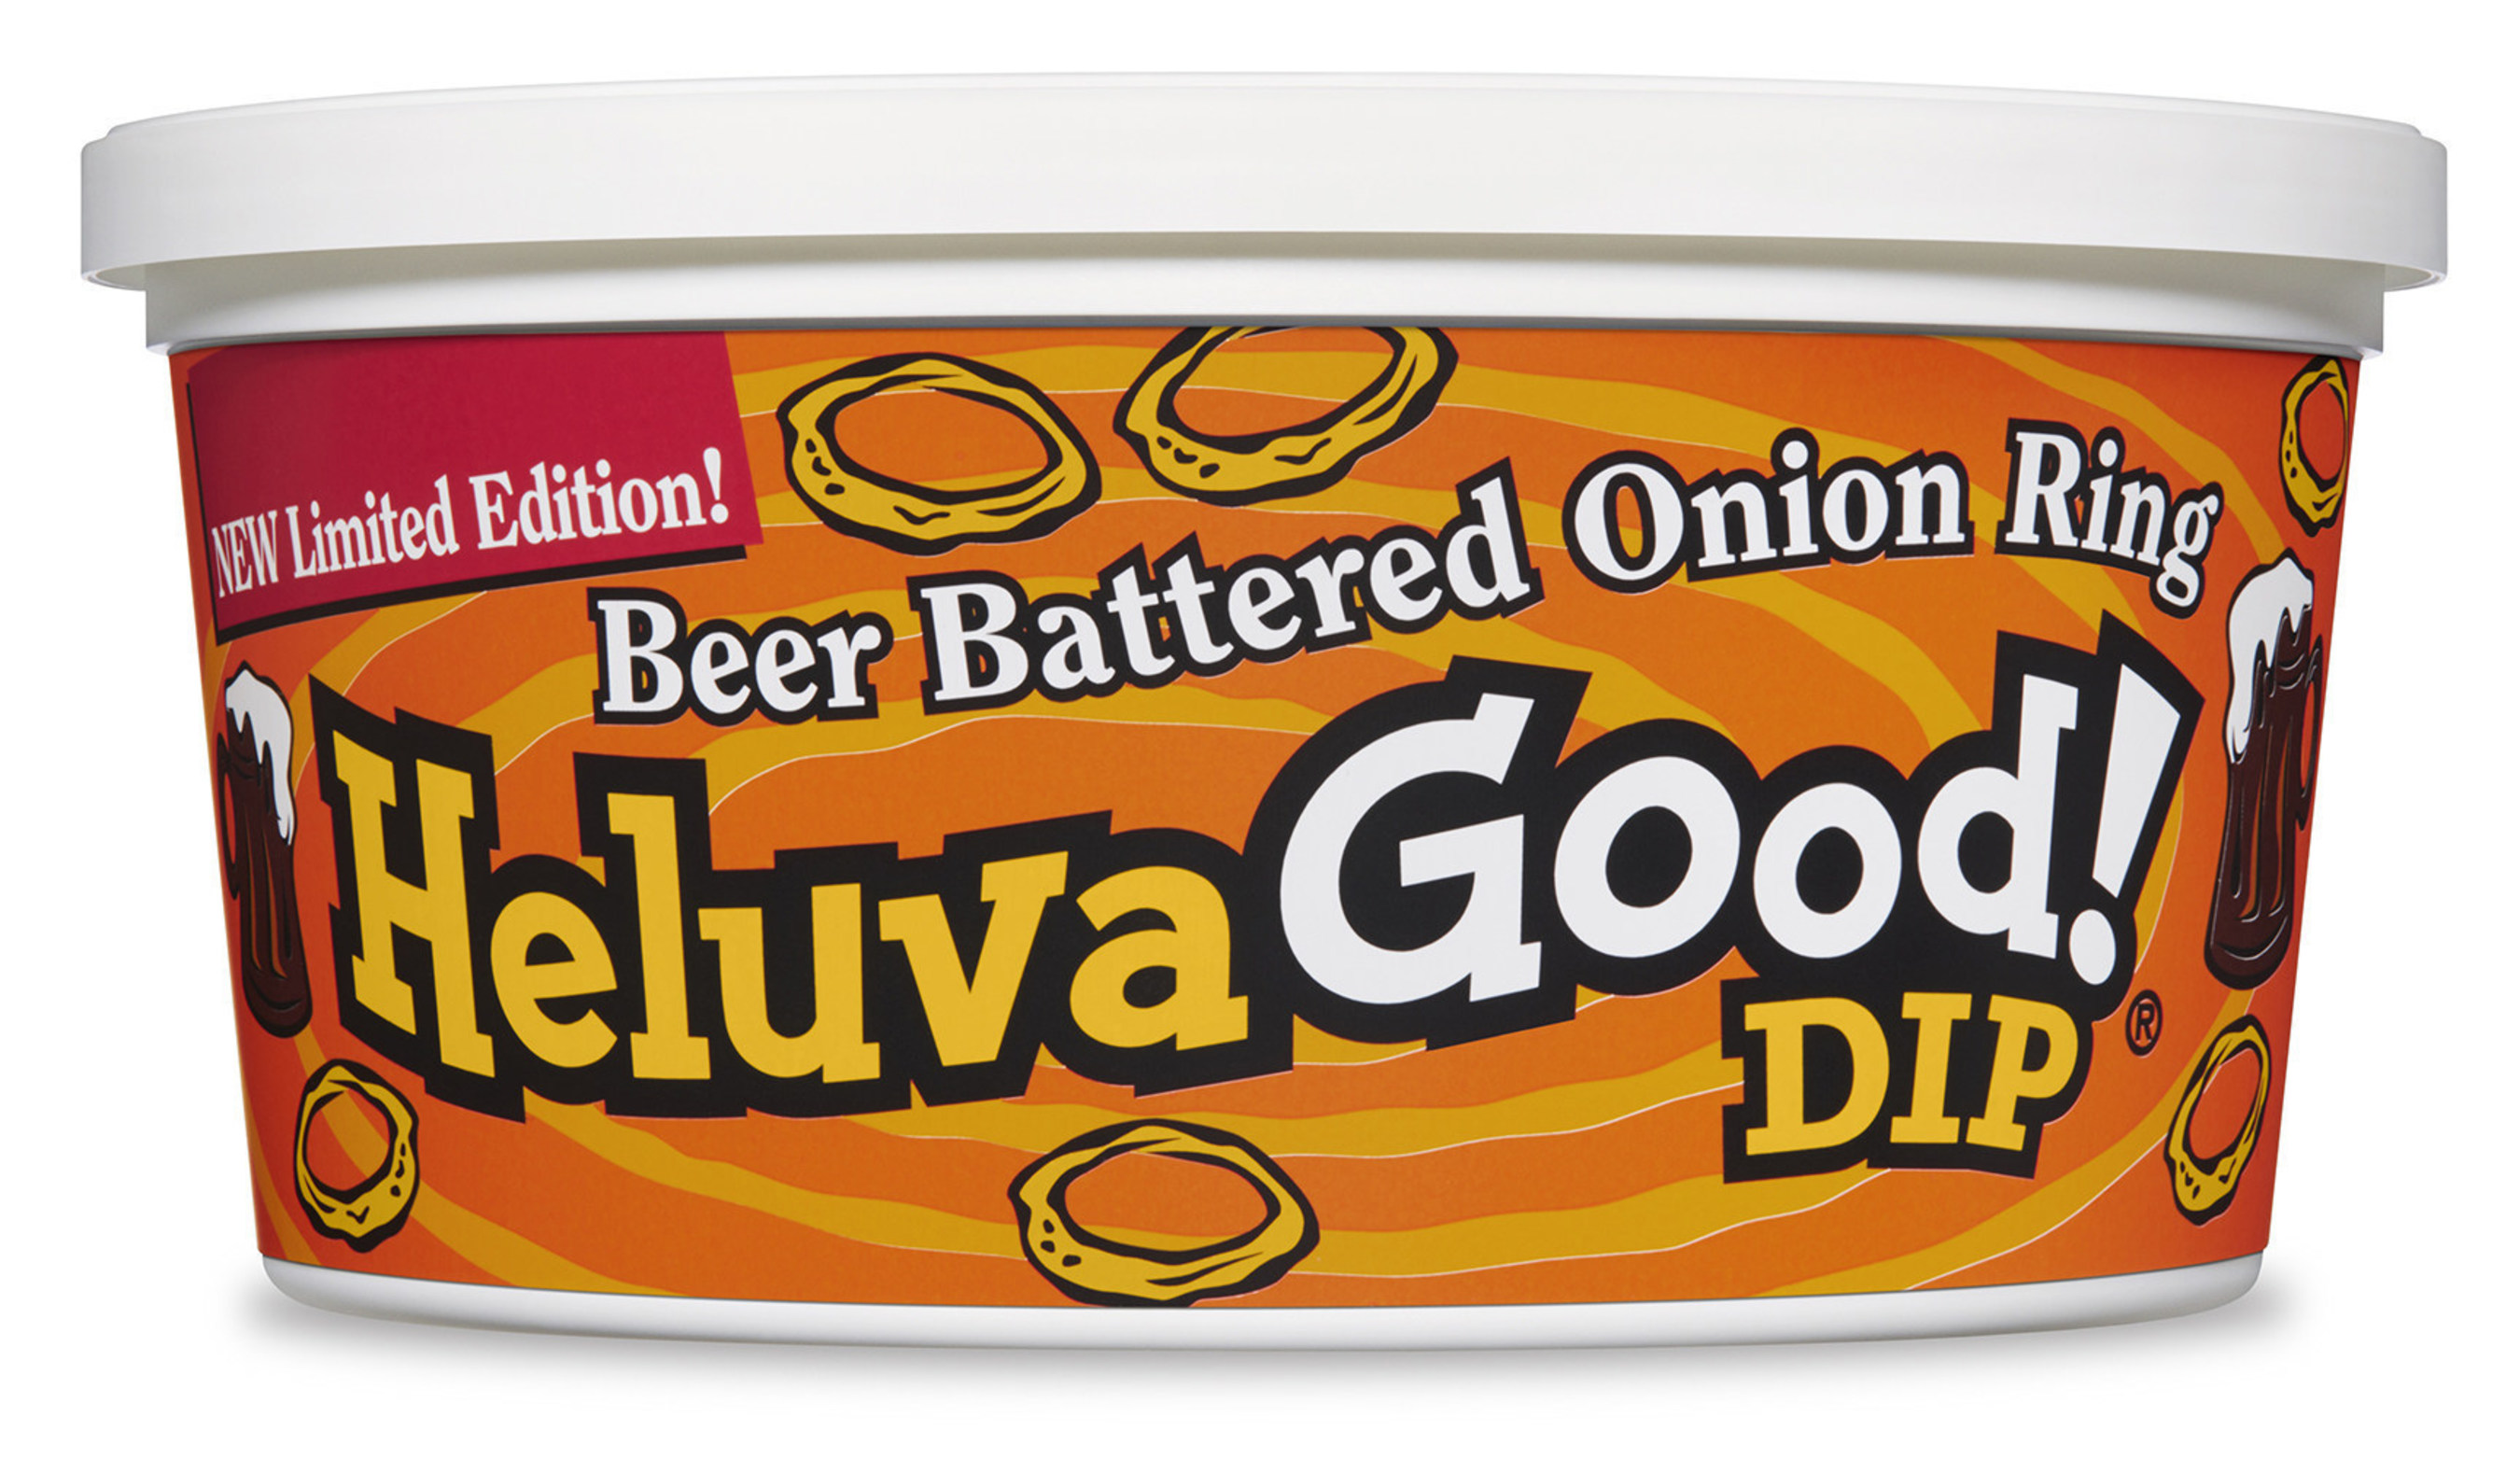 Heluva Good!(R)'s new limited edition Beer Battered Onion Ring Dip blends crispy, golden fried onions with a hint of lager for a big, bold taste that's perfect for all snacking occasions.